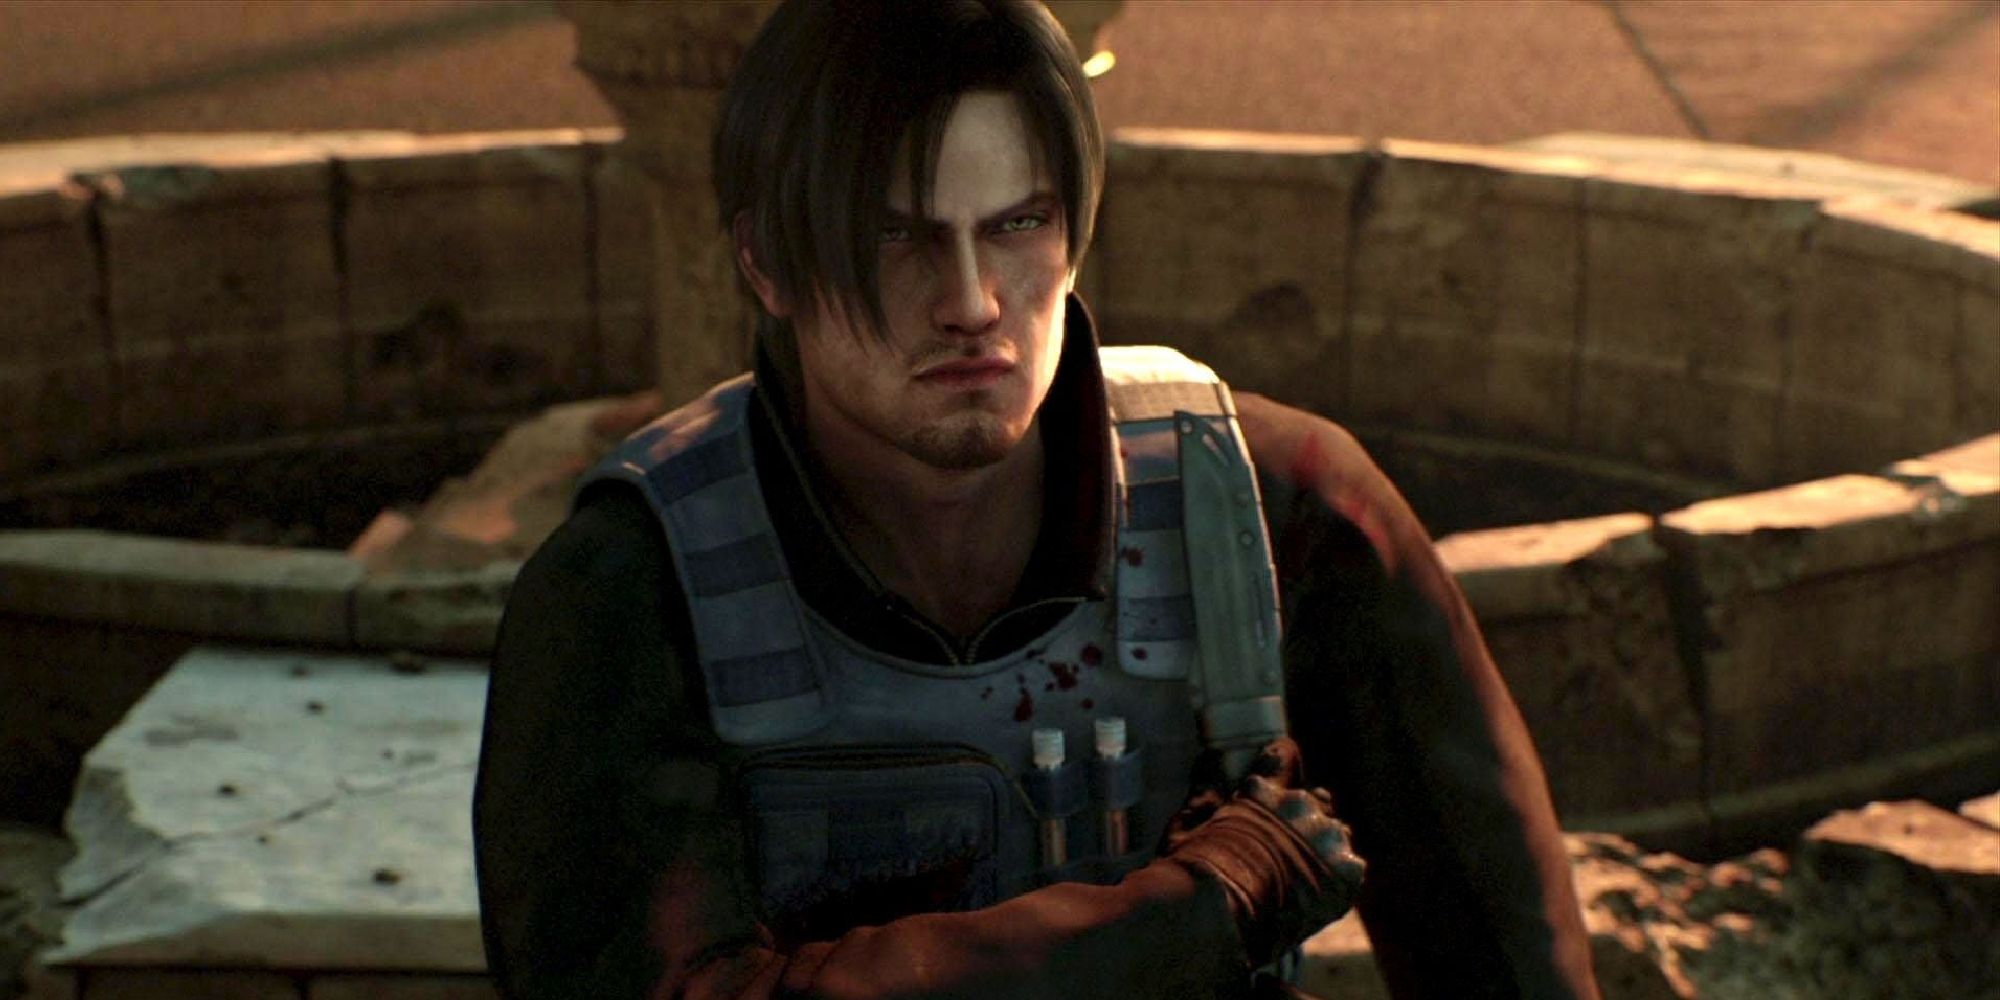 Leon reaching for the tactical knife strapped to his vest, an angry glare on his features. 